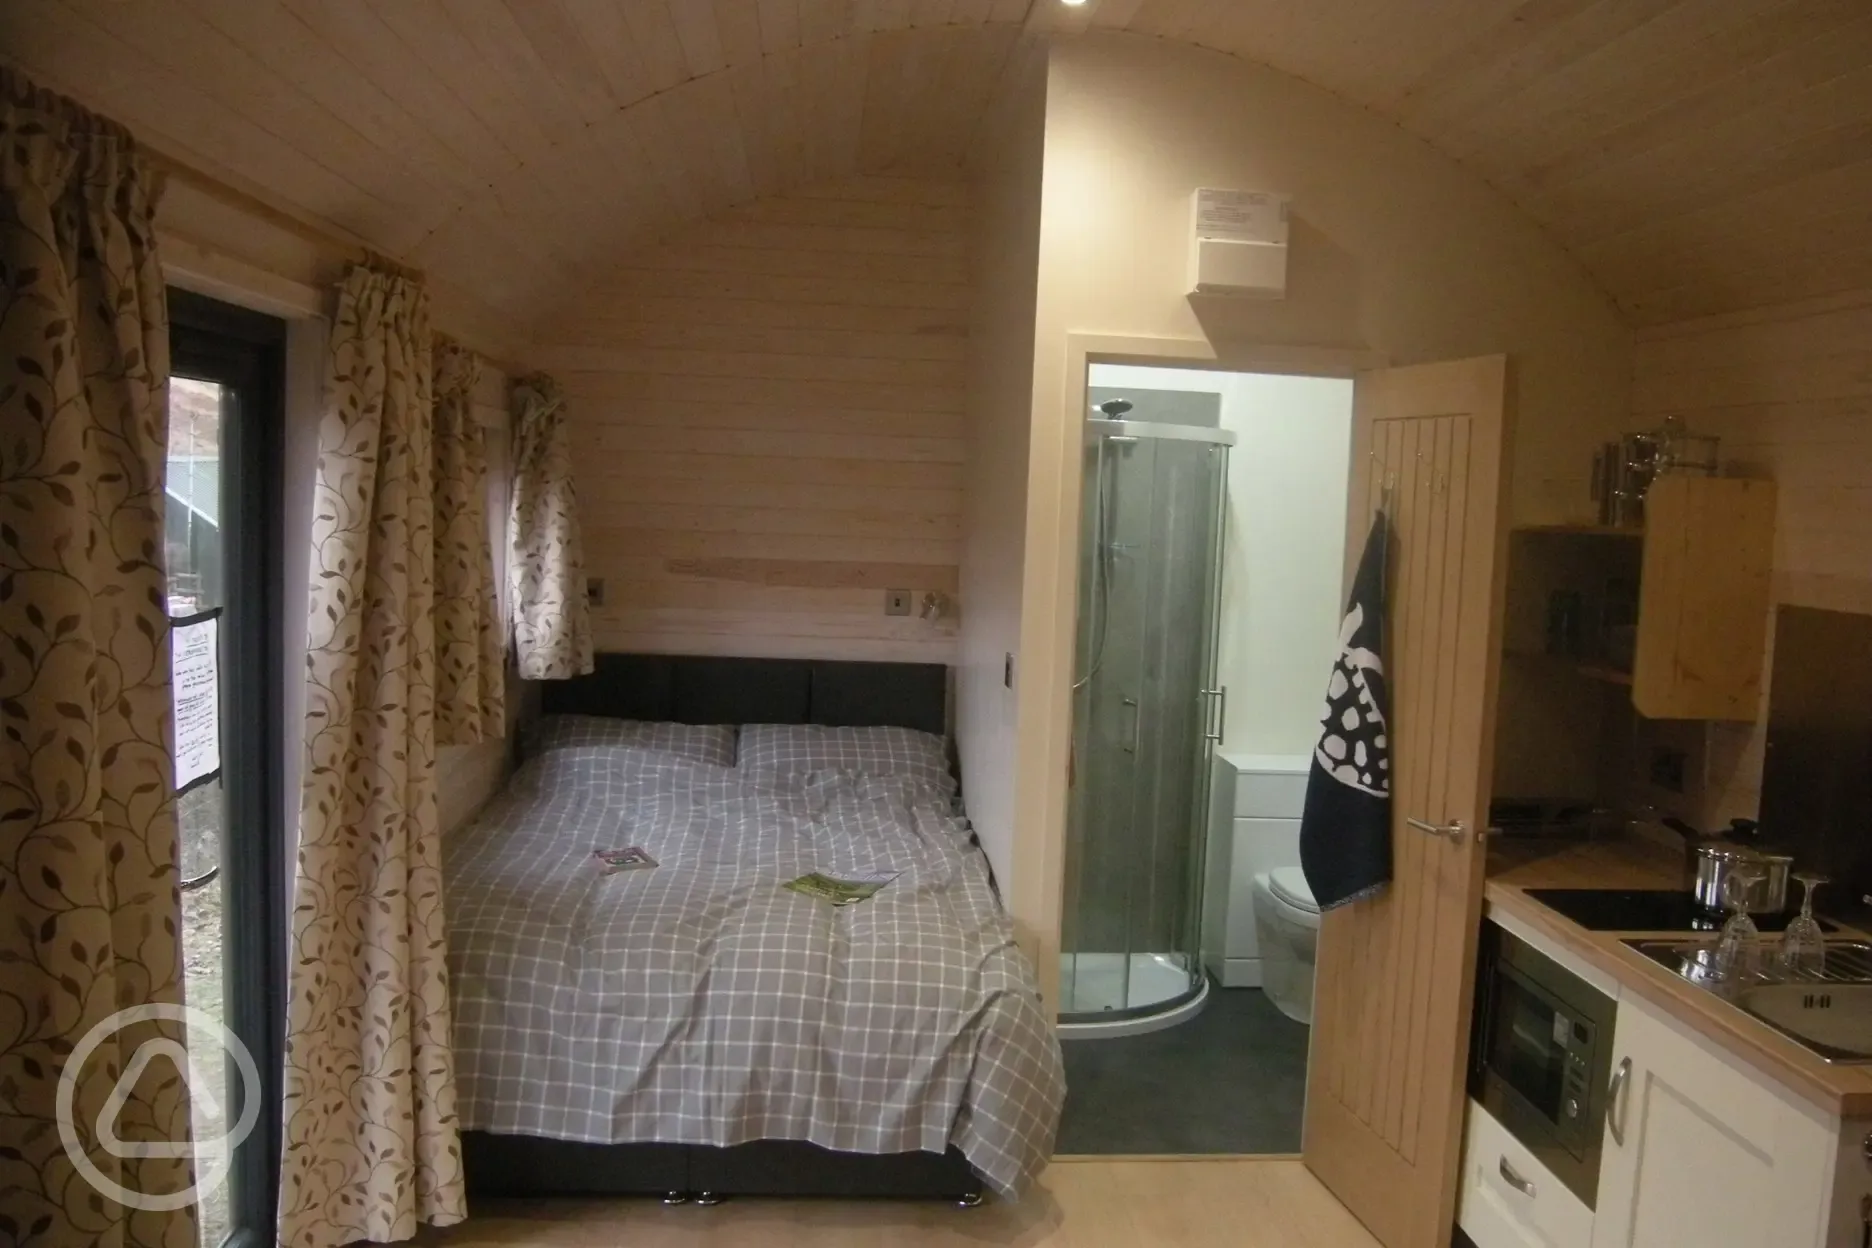 Double bed, shower room and cooking area of shepherd's hut